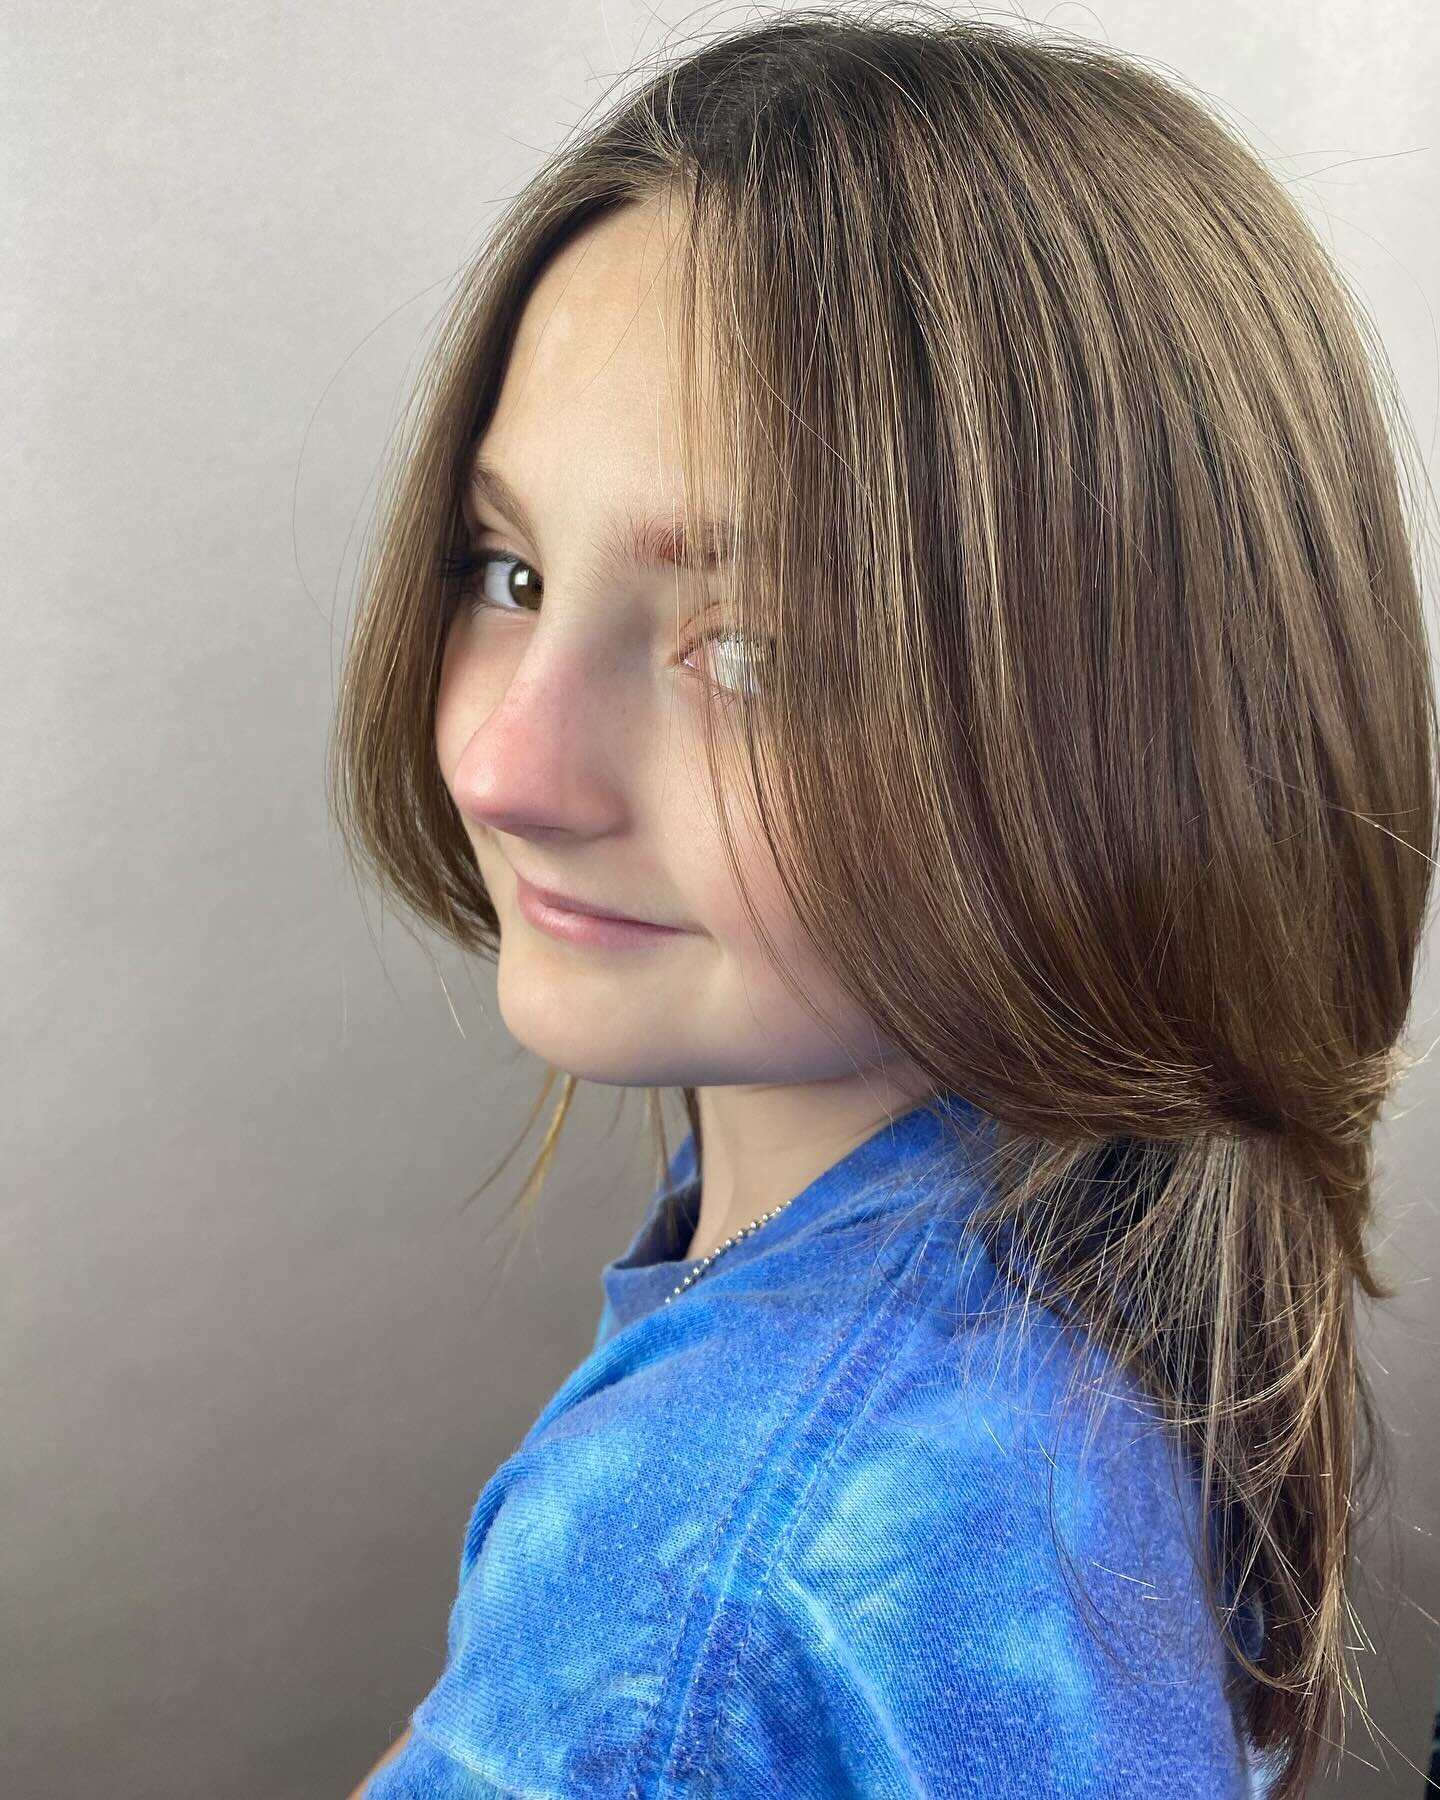 Lily and her fresh haircut!! We love it 🤩 
.
.
She was so excited and asked for a photo shoot had to share 
#luvwhatido #kidshaircut #wemakeitvivid